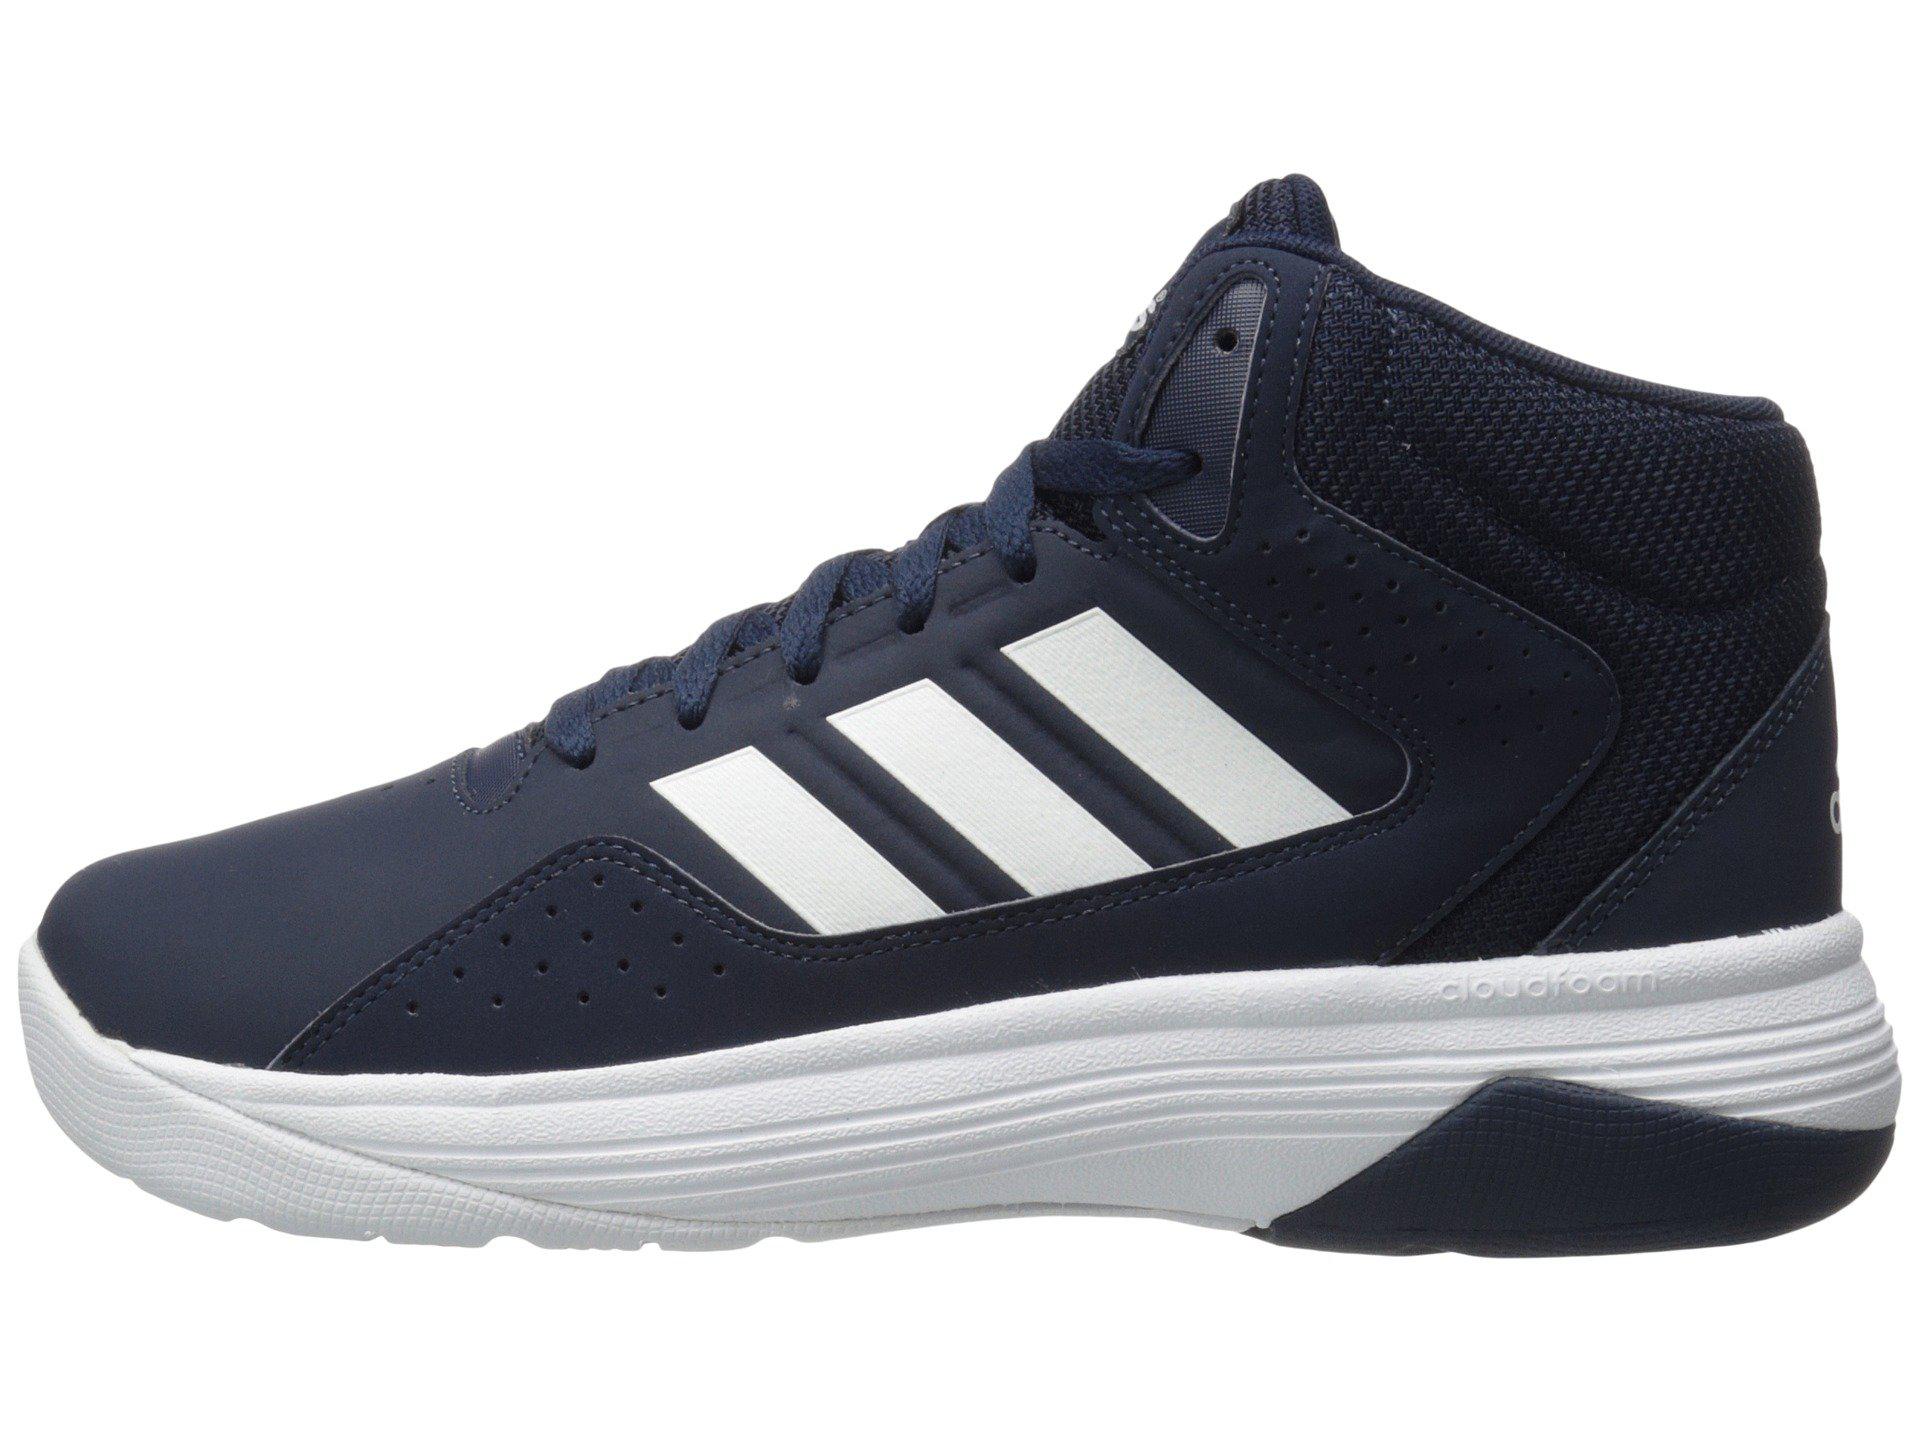 adidas Cloudfoam Ilation Mid in Blue for Men - Lyst